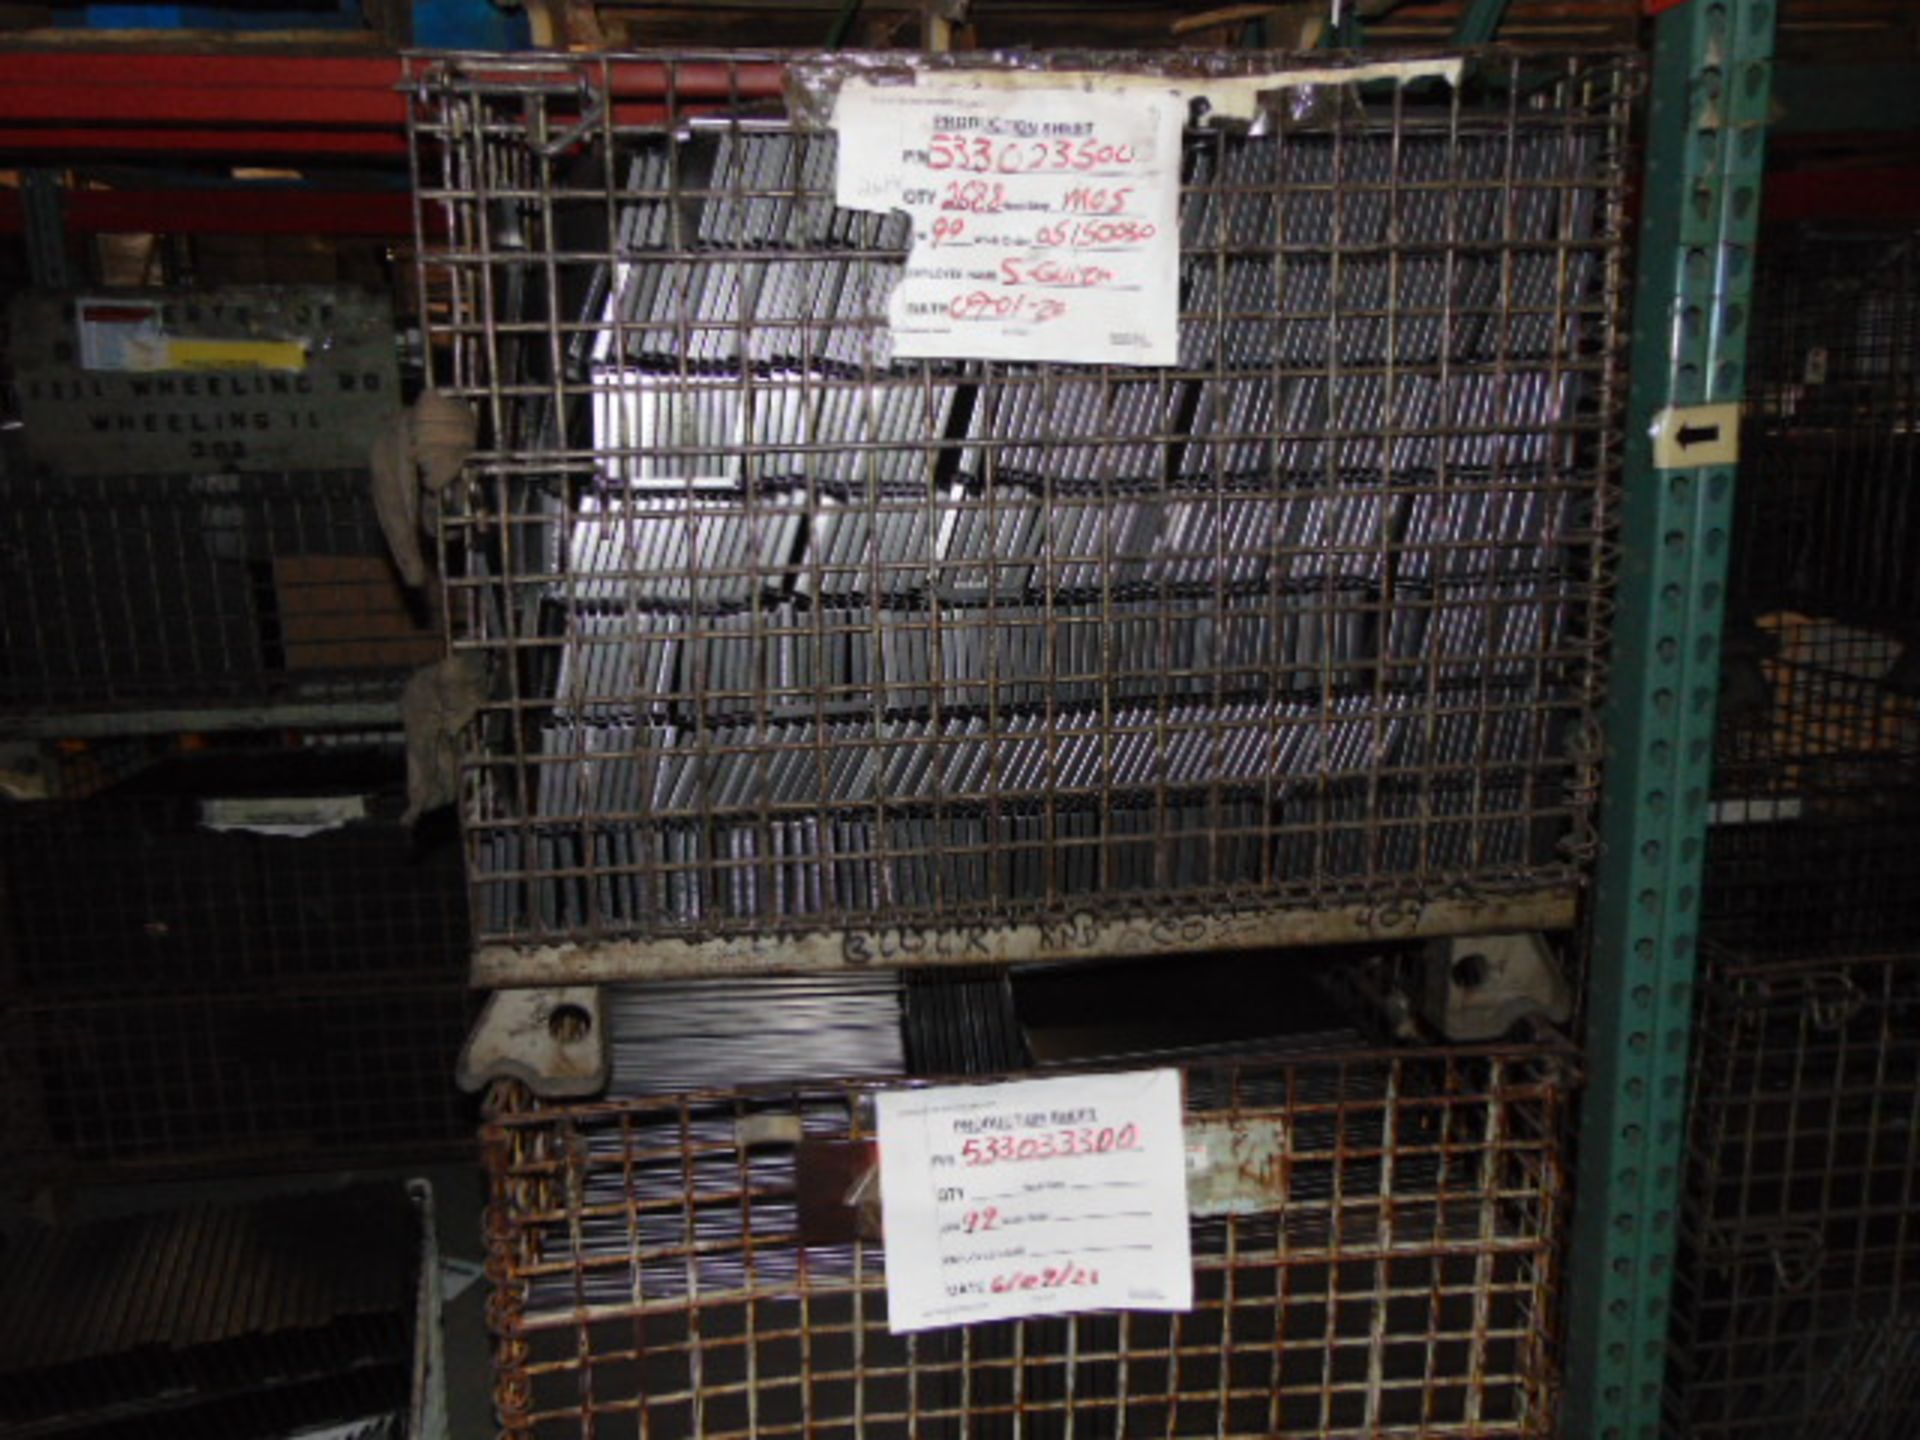 LOT CONSISTING OF: assorted steel in process parts, wire baskets & cardboard (no dies or racks) ( - Image 35 of 39